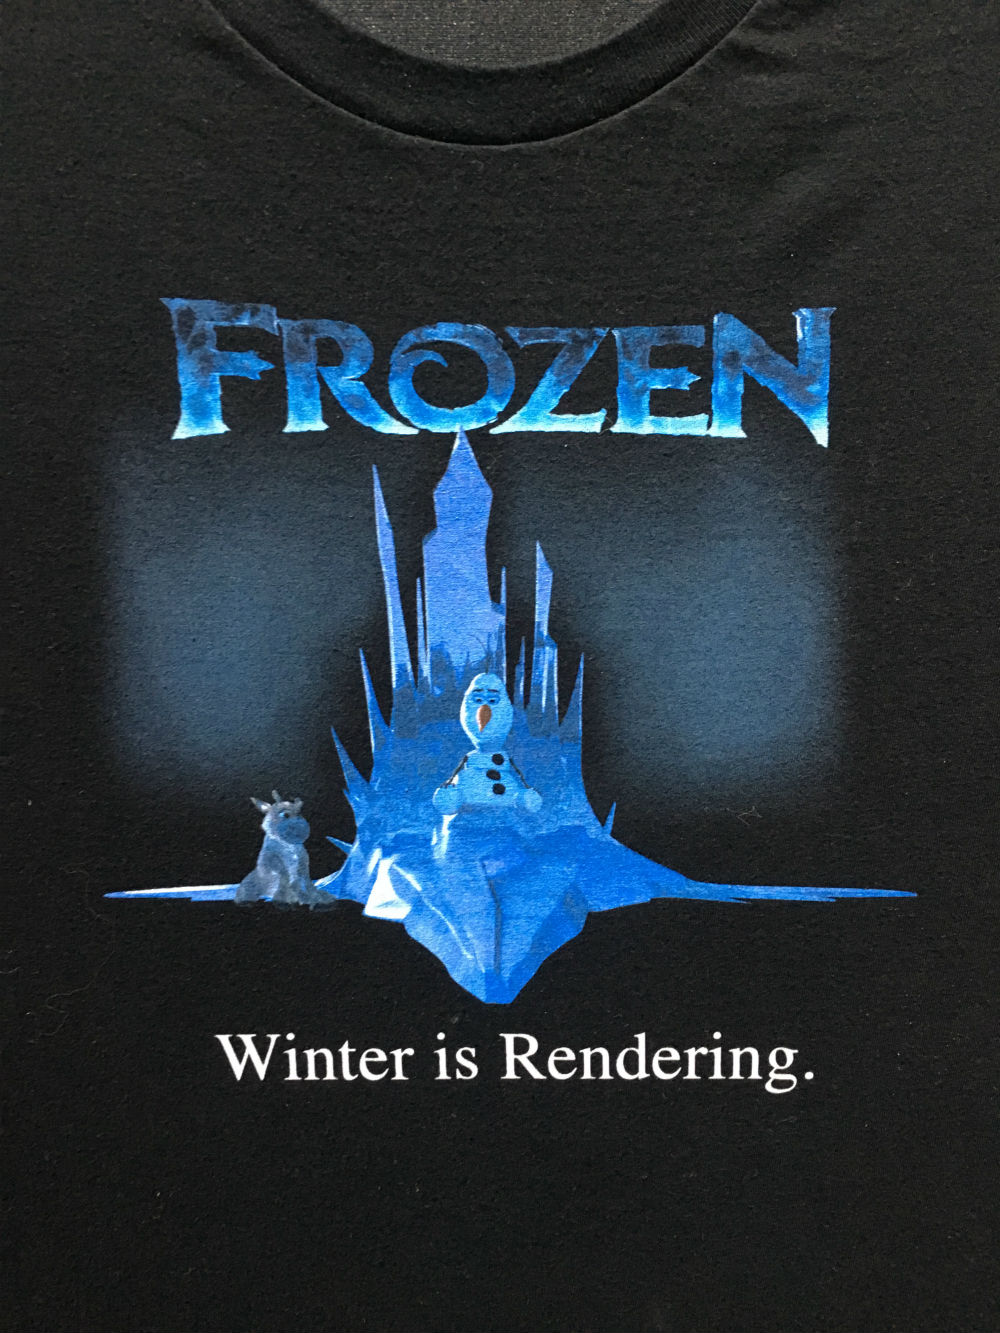 Unfortunately, You Can Never Buy These Incredible Disney Animation T-Shirts